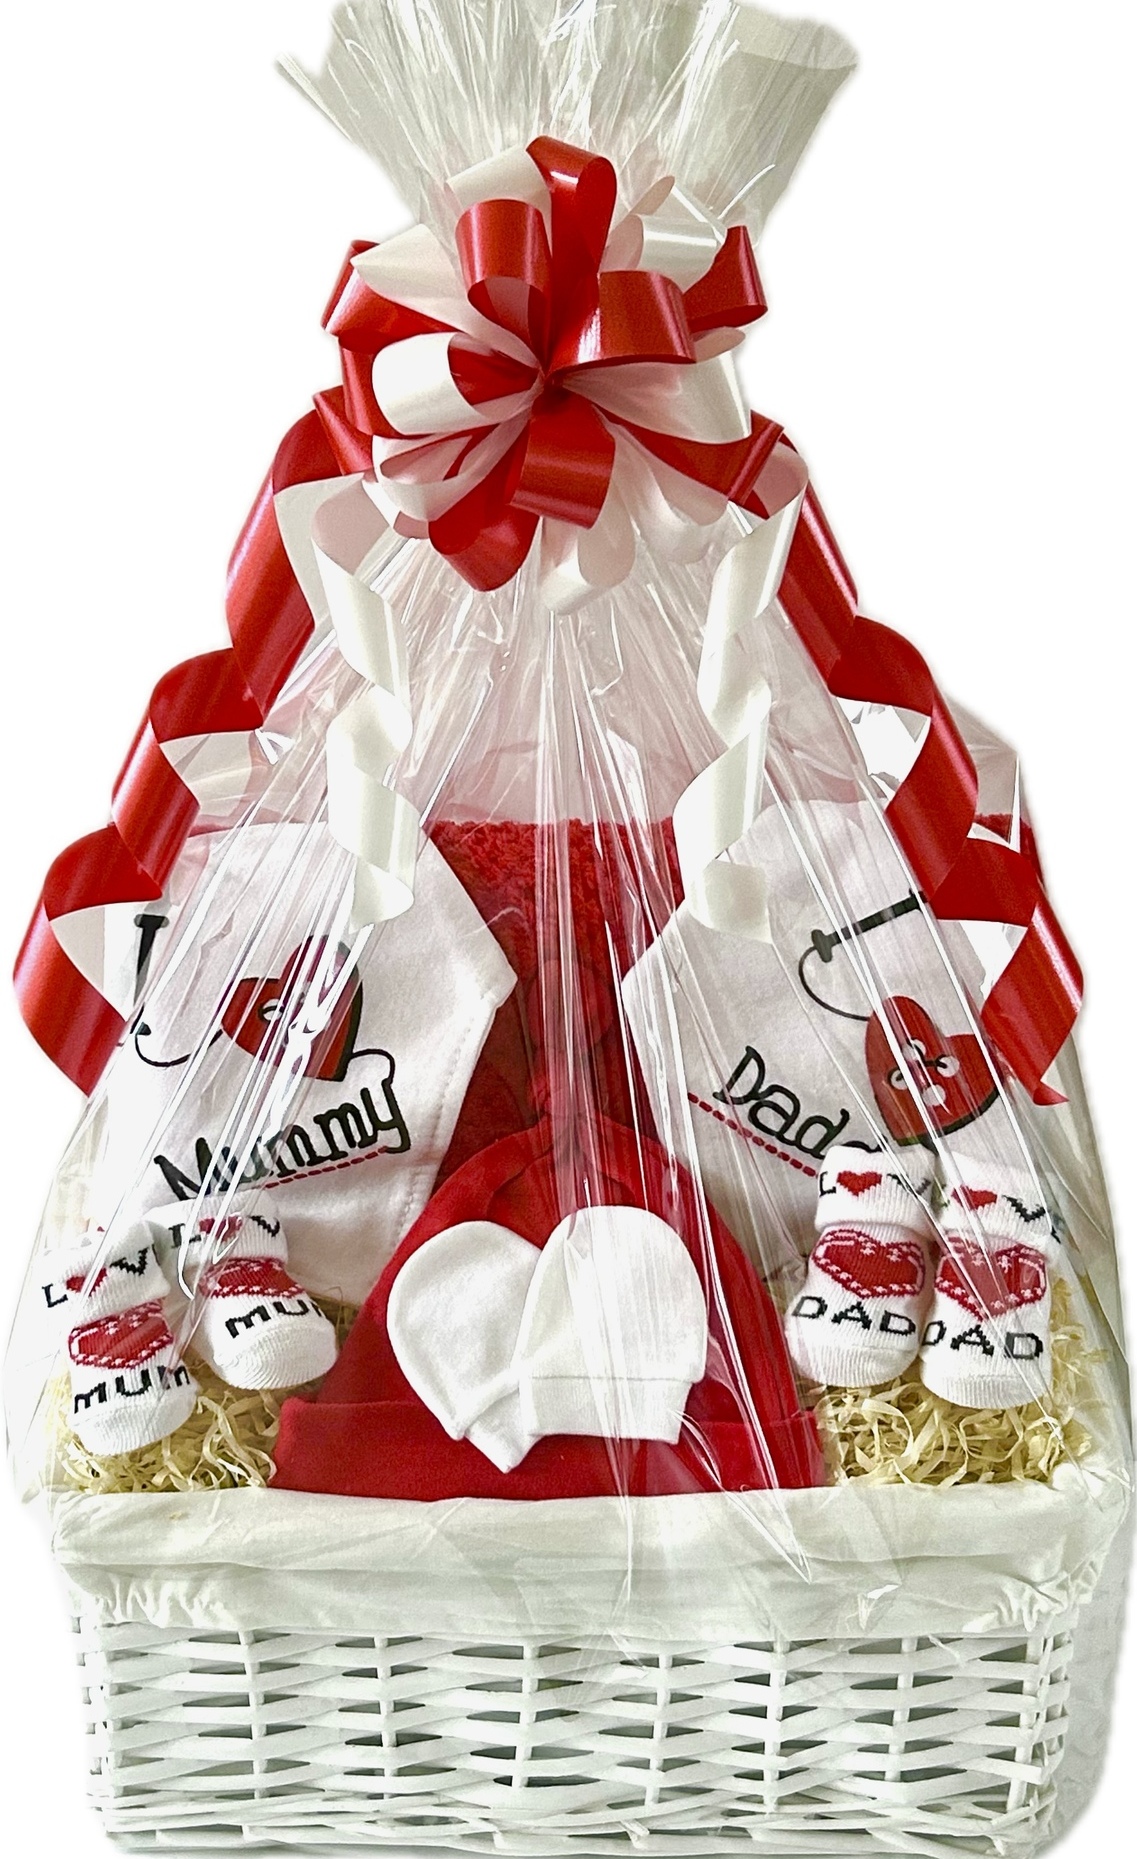 I Love You Red & White Baby Gift Basket